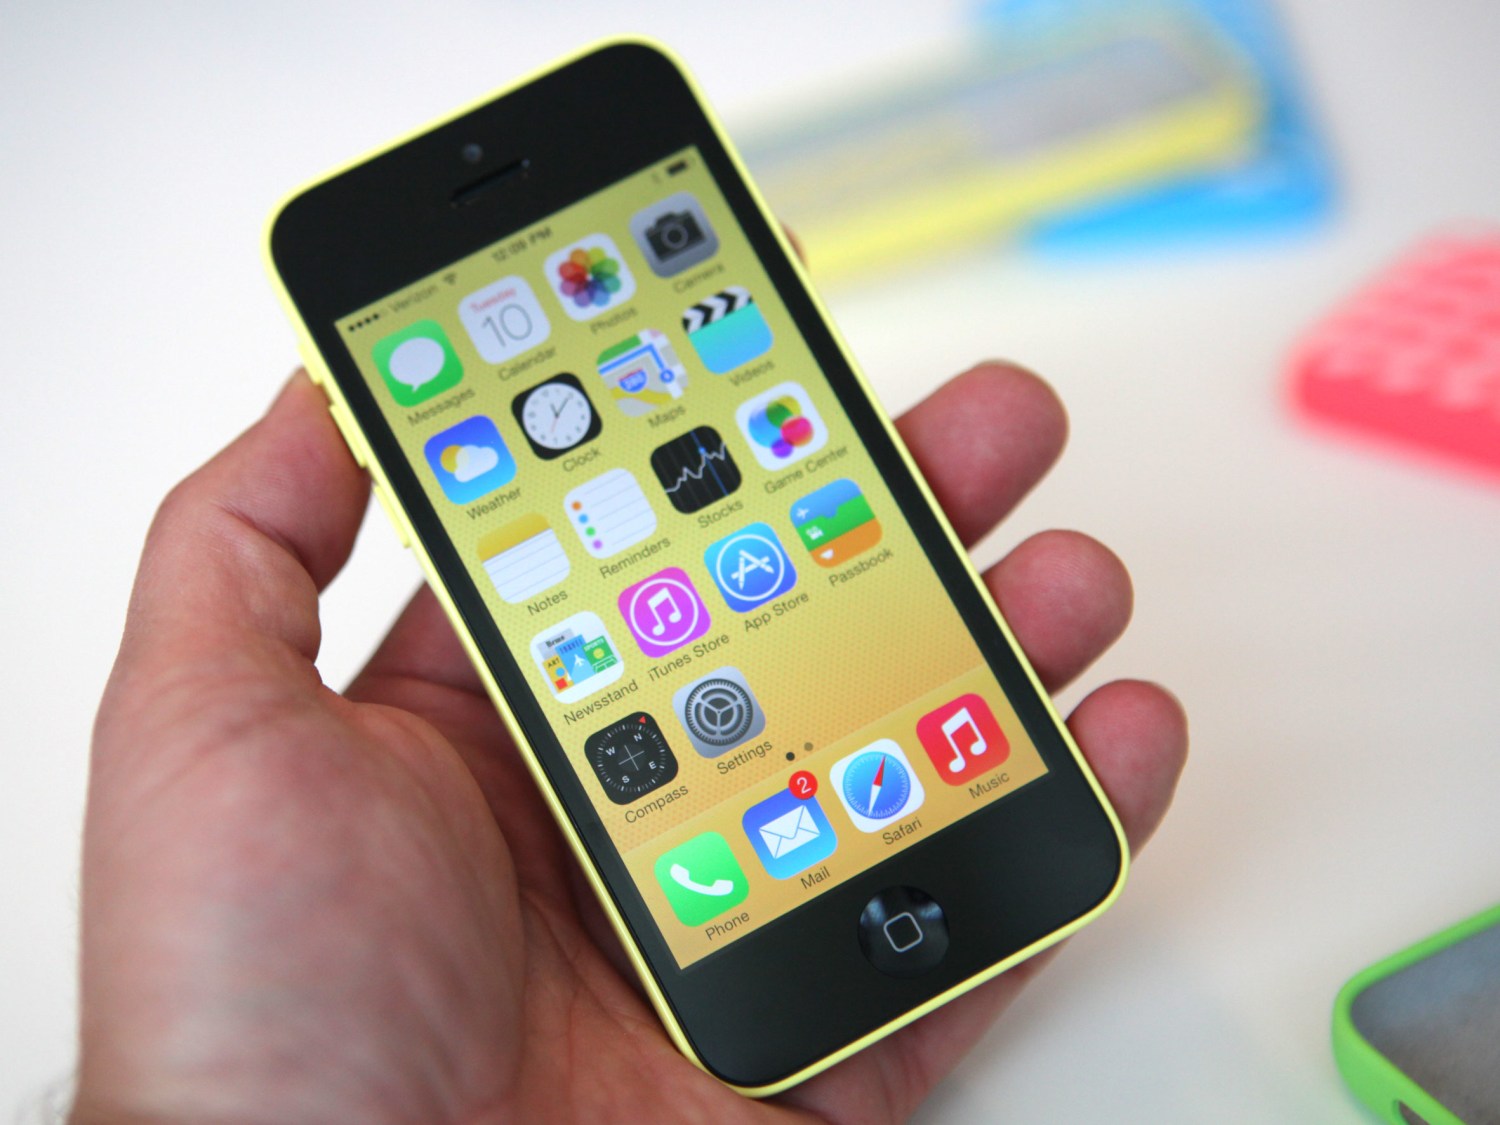 iPhone 5C: Apple brings color and $99 price to new phone